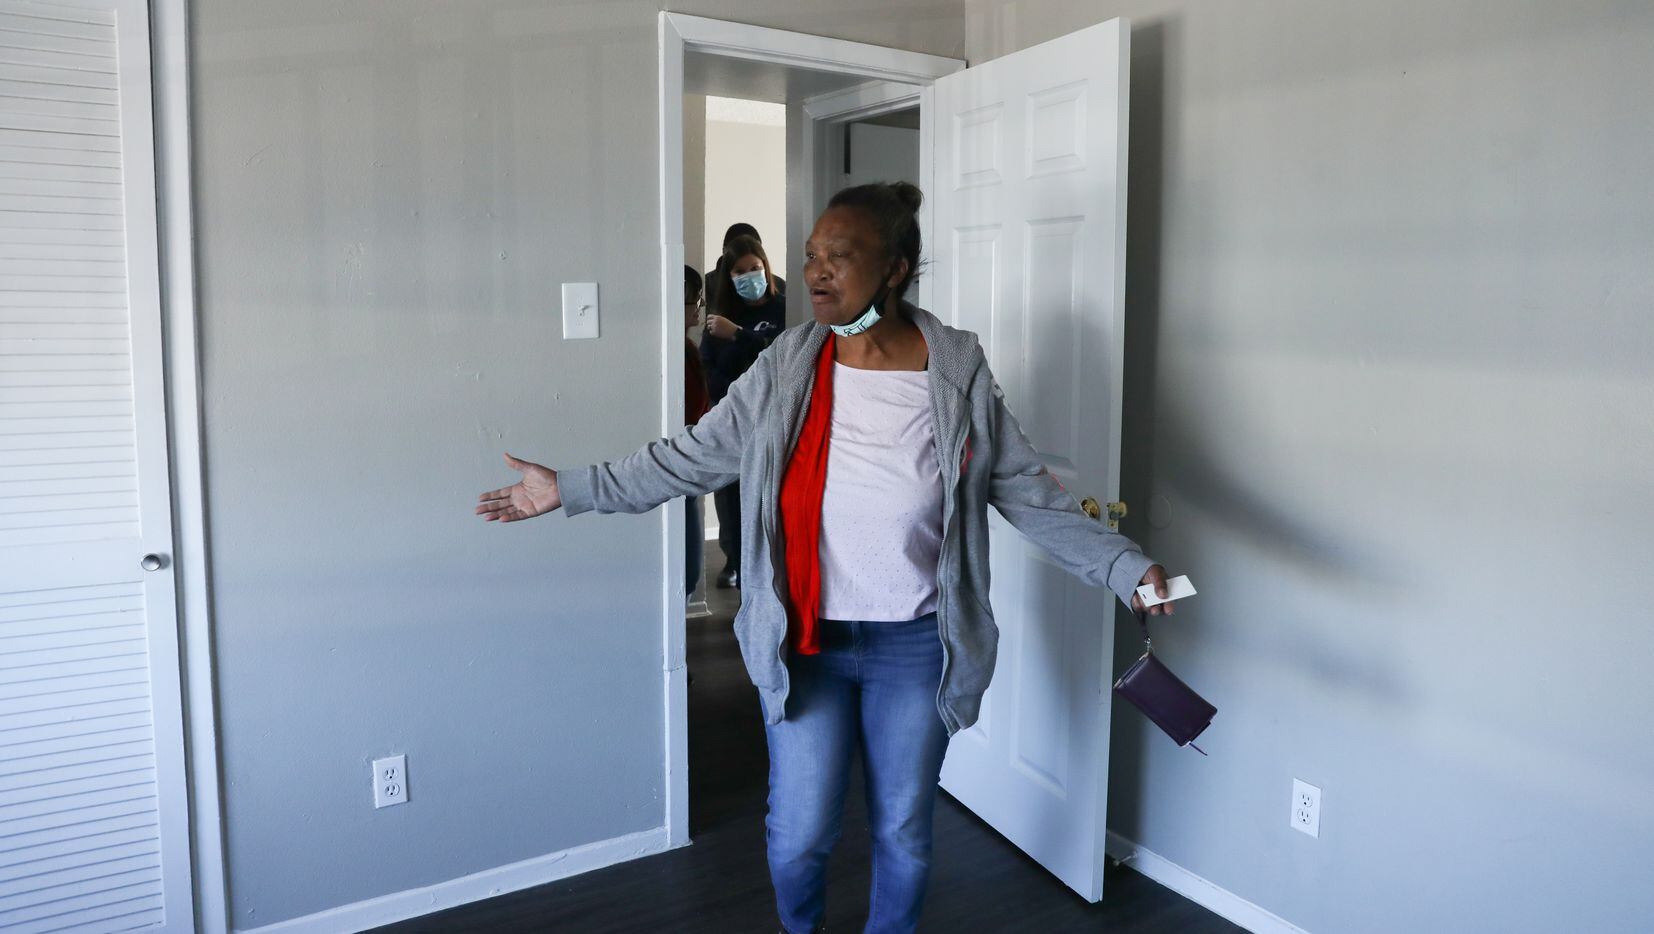 Patricia Freeman takes a first look at the bedroom in her new apartment in southern Dallas on November 19, 2021. Staff from The Bridge Homeless Recovery Center, Catholic Charities and the apartment complex follow her inside. (Liesbeth Powers/Special Contributor)